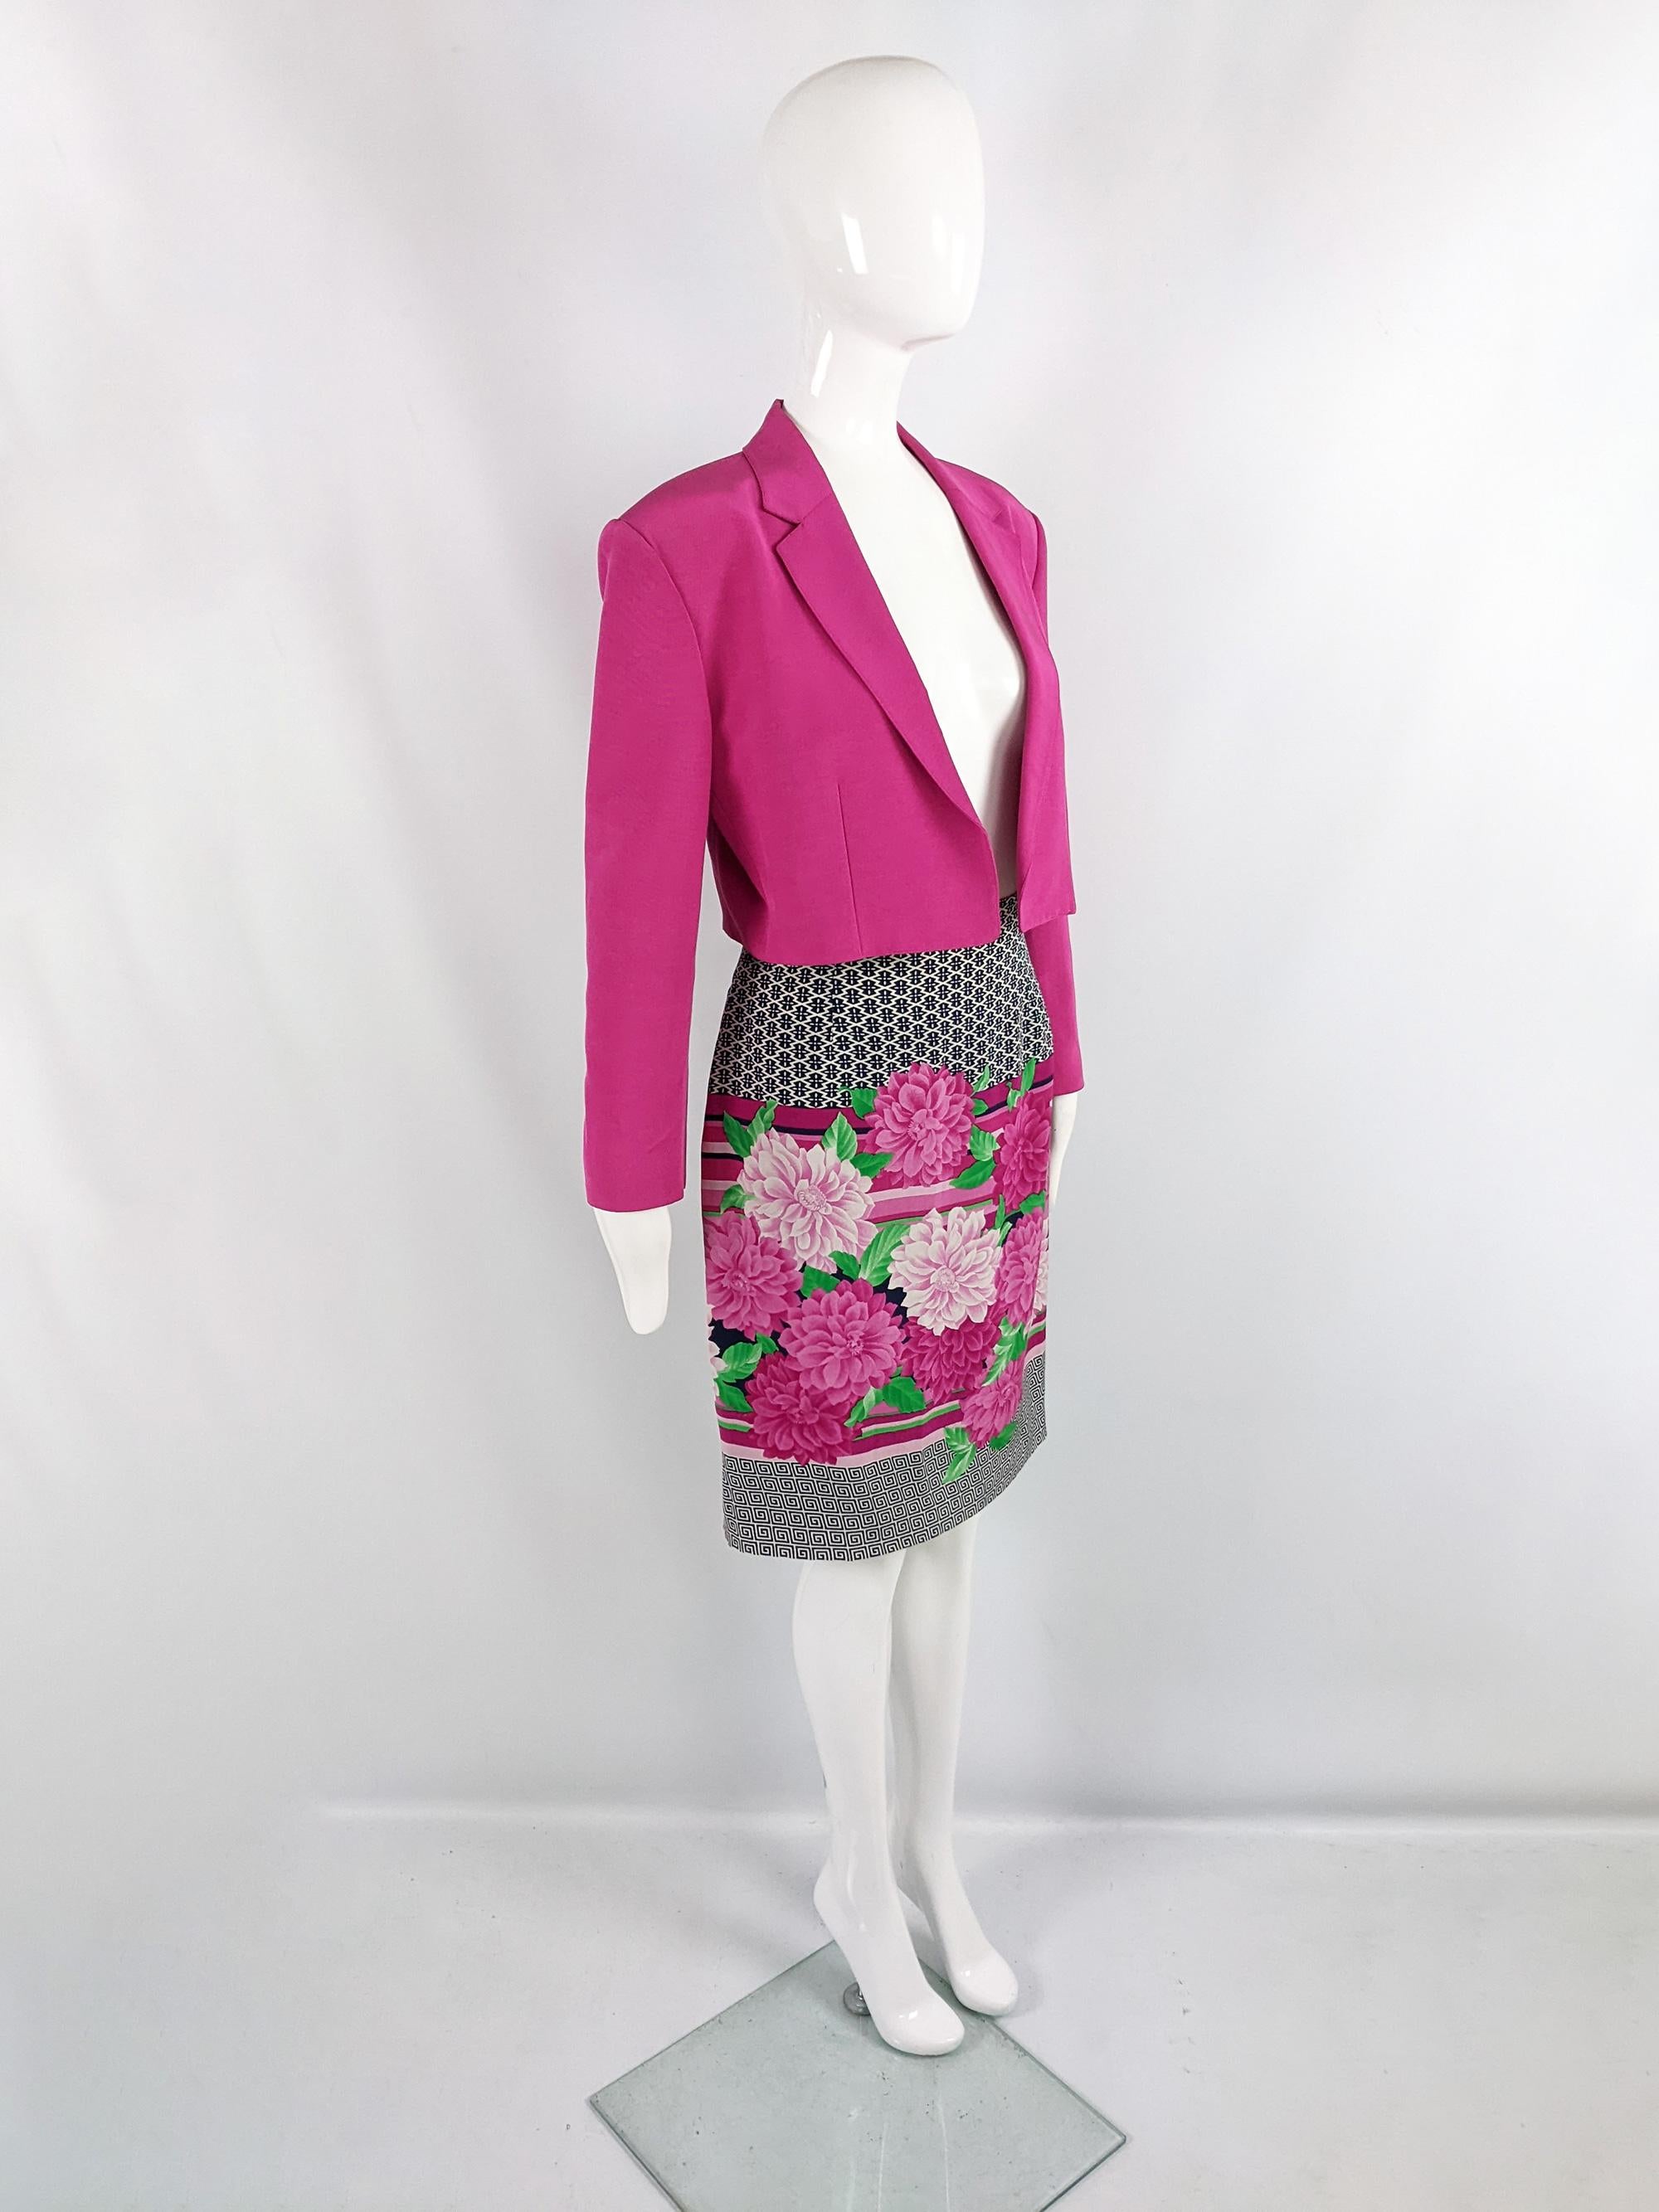 A fabulous vintage womens skirt suit from the late 80s / early 90s by luxury Italian fashion house, Genny (who Gianni Versace designed for before starting his own label). Consisting of a chic, open fronted, cropped jacket in a fuchsia faille fabric,